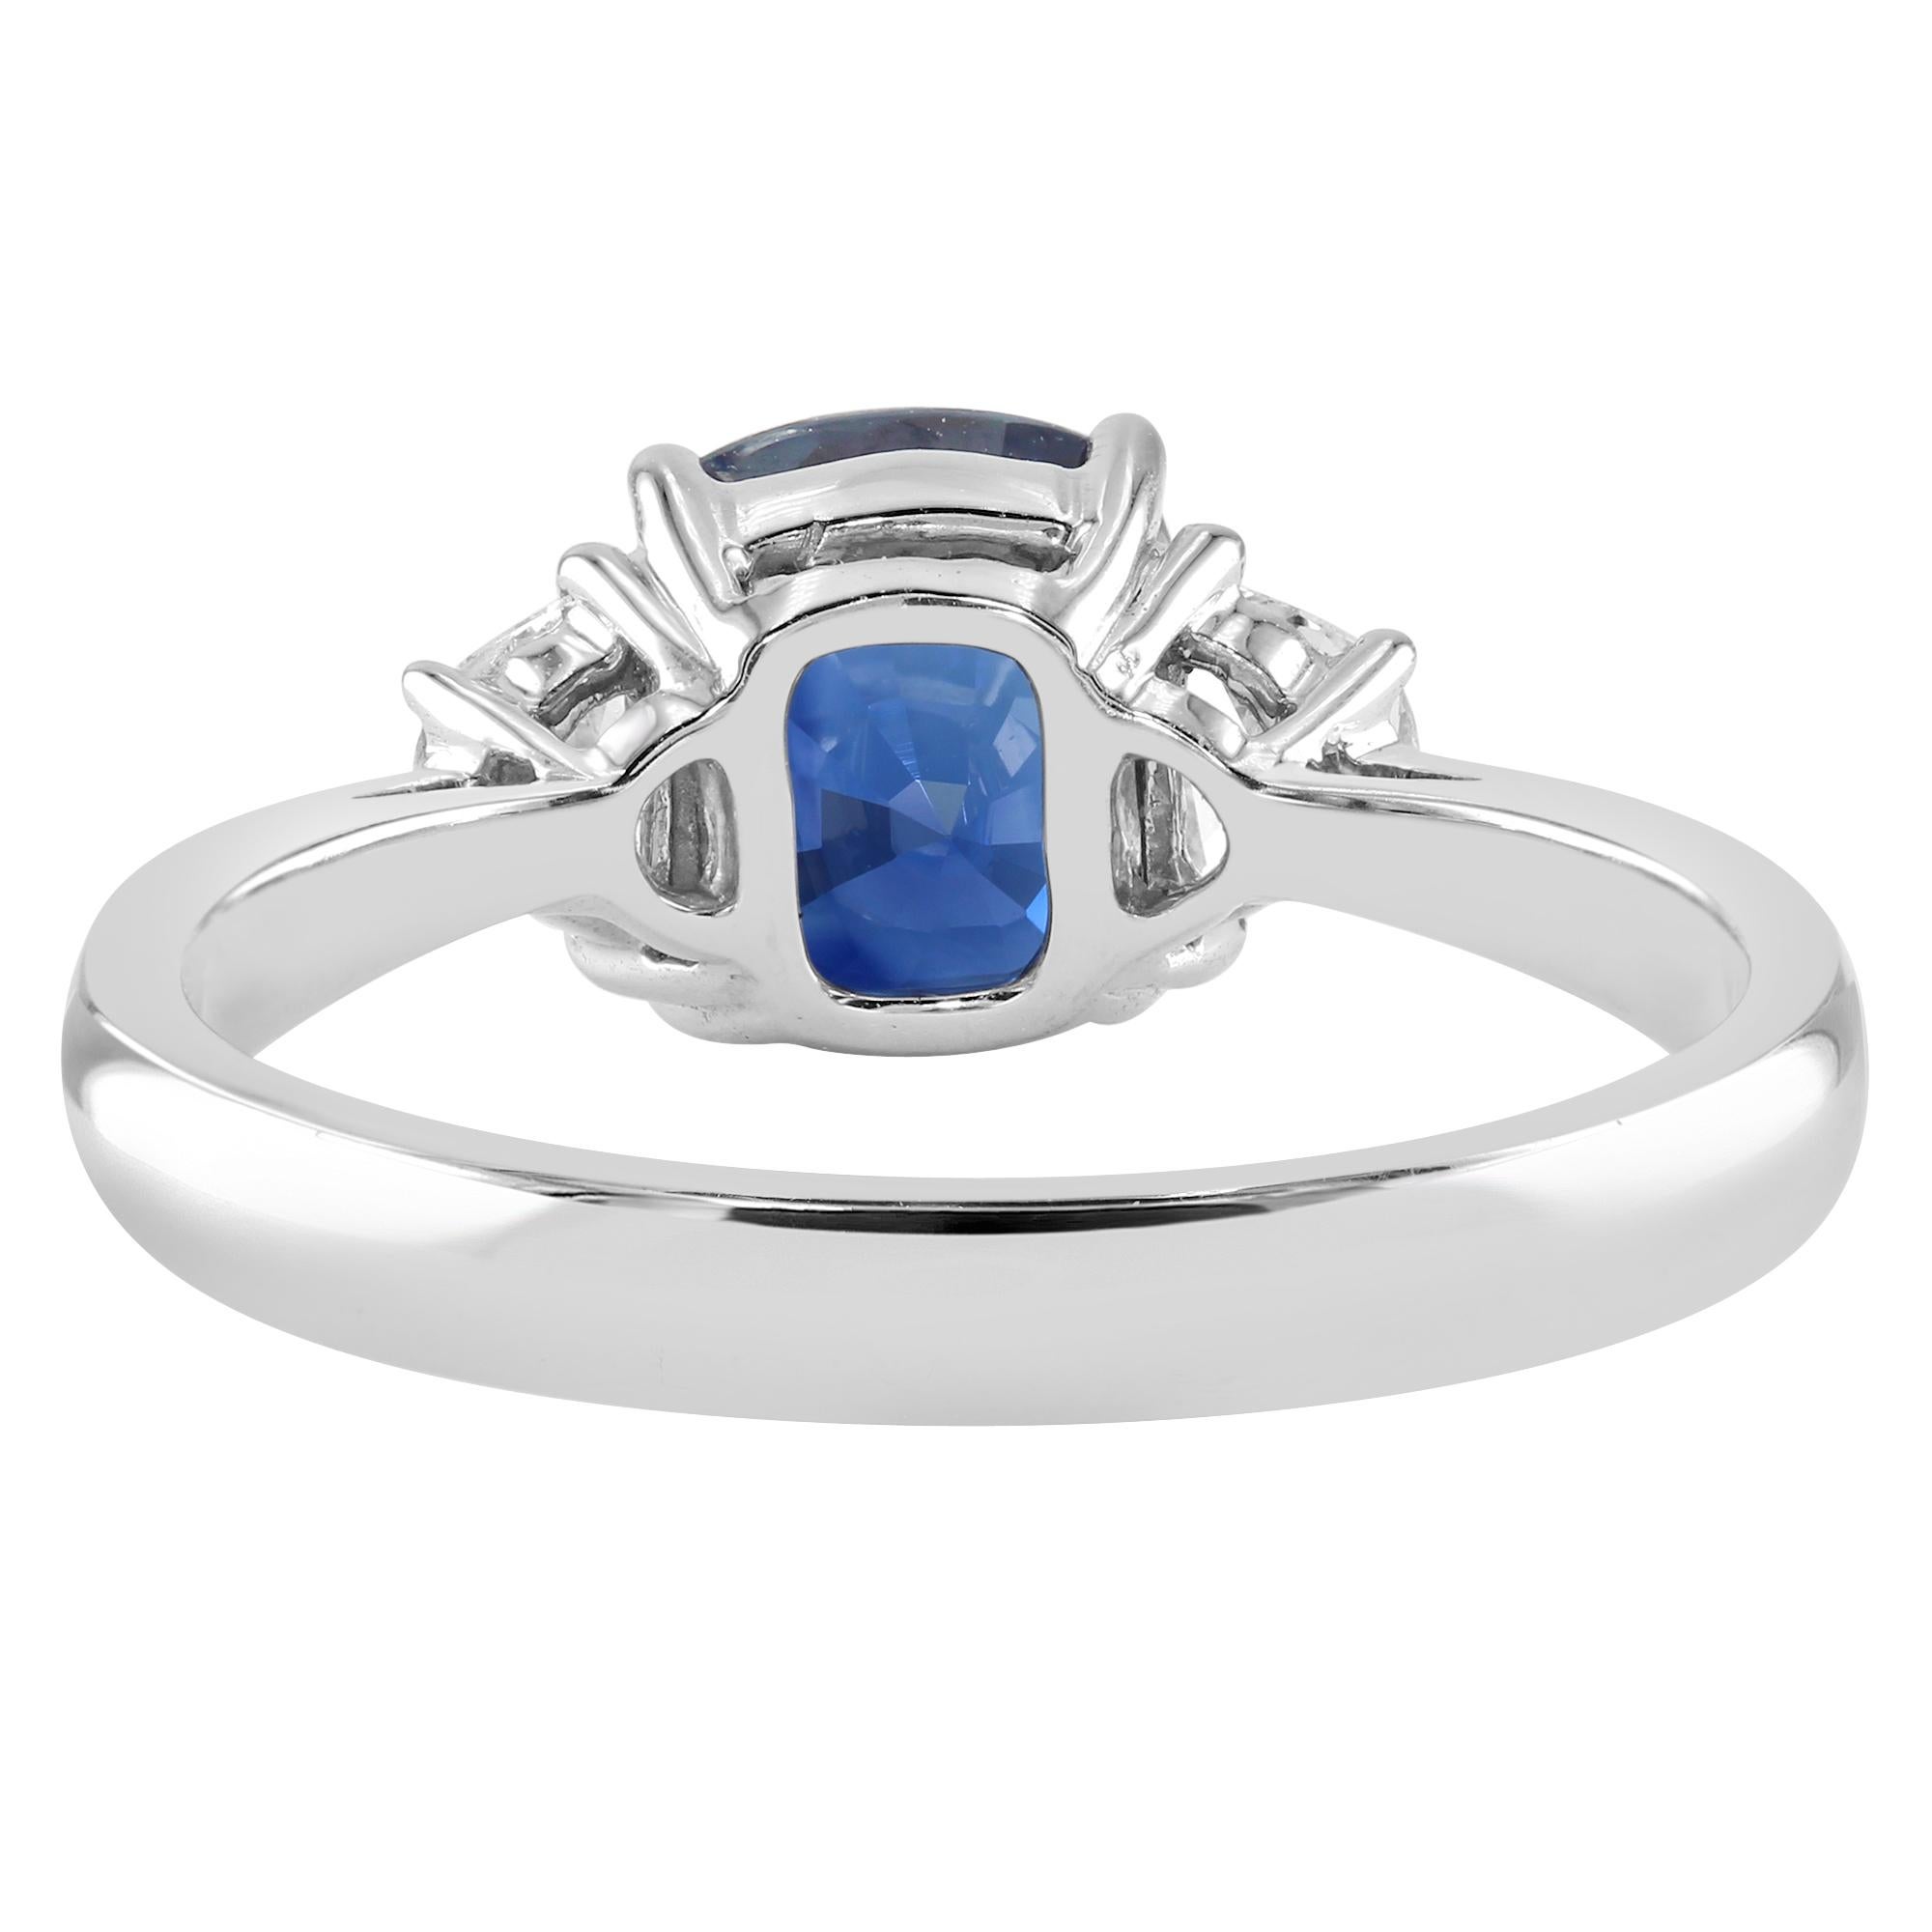 Cushion Cut 2.09 Carat Sapphire and Diamond White Gold Three-Stone Engagement Ring For Sale